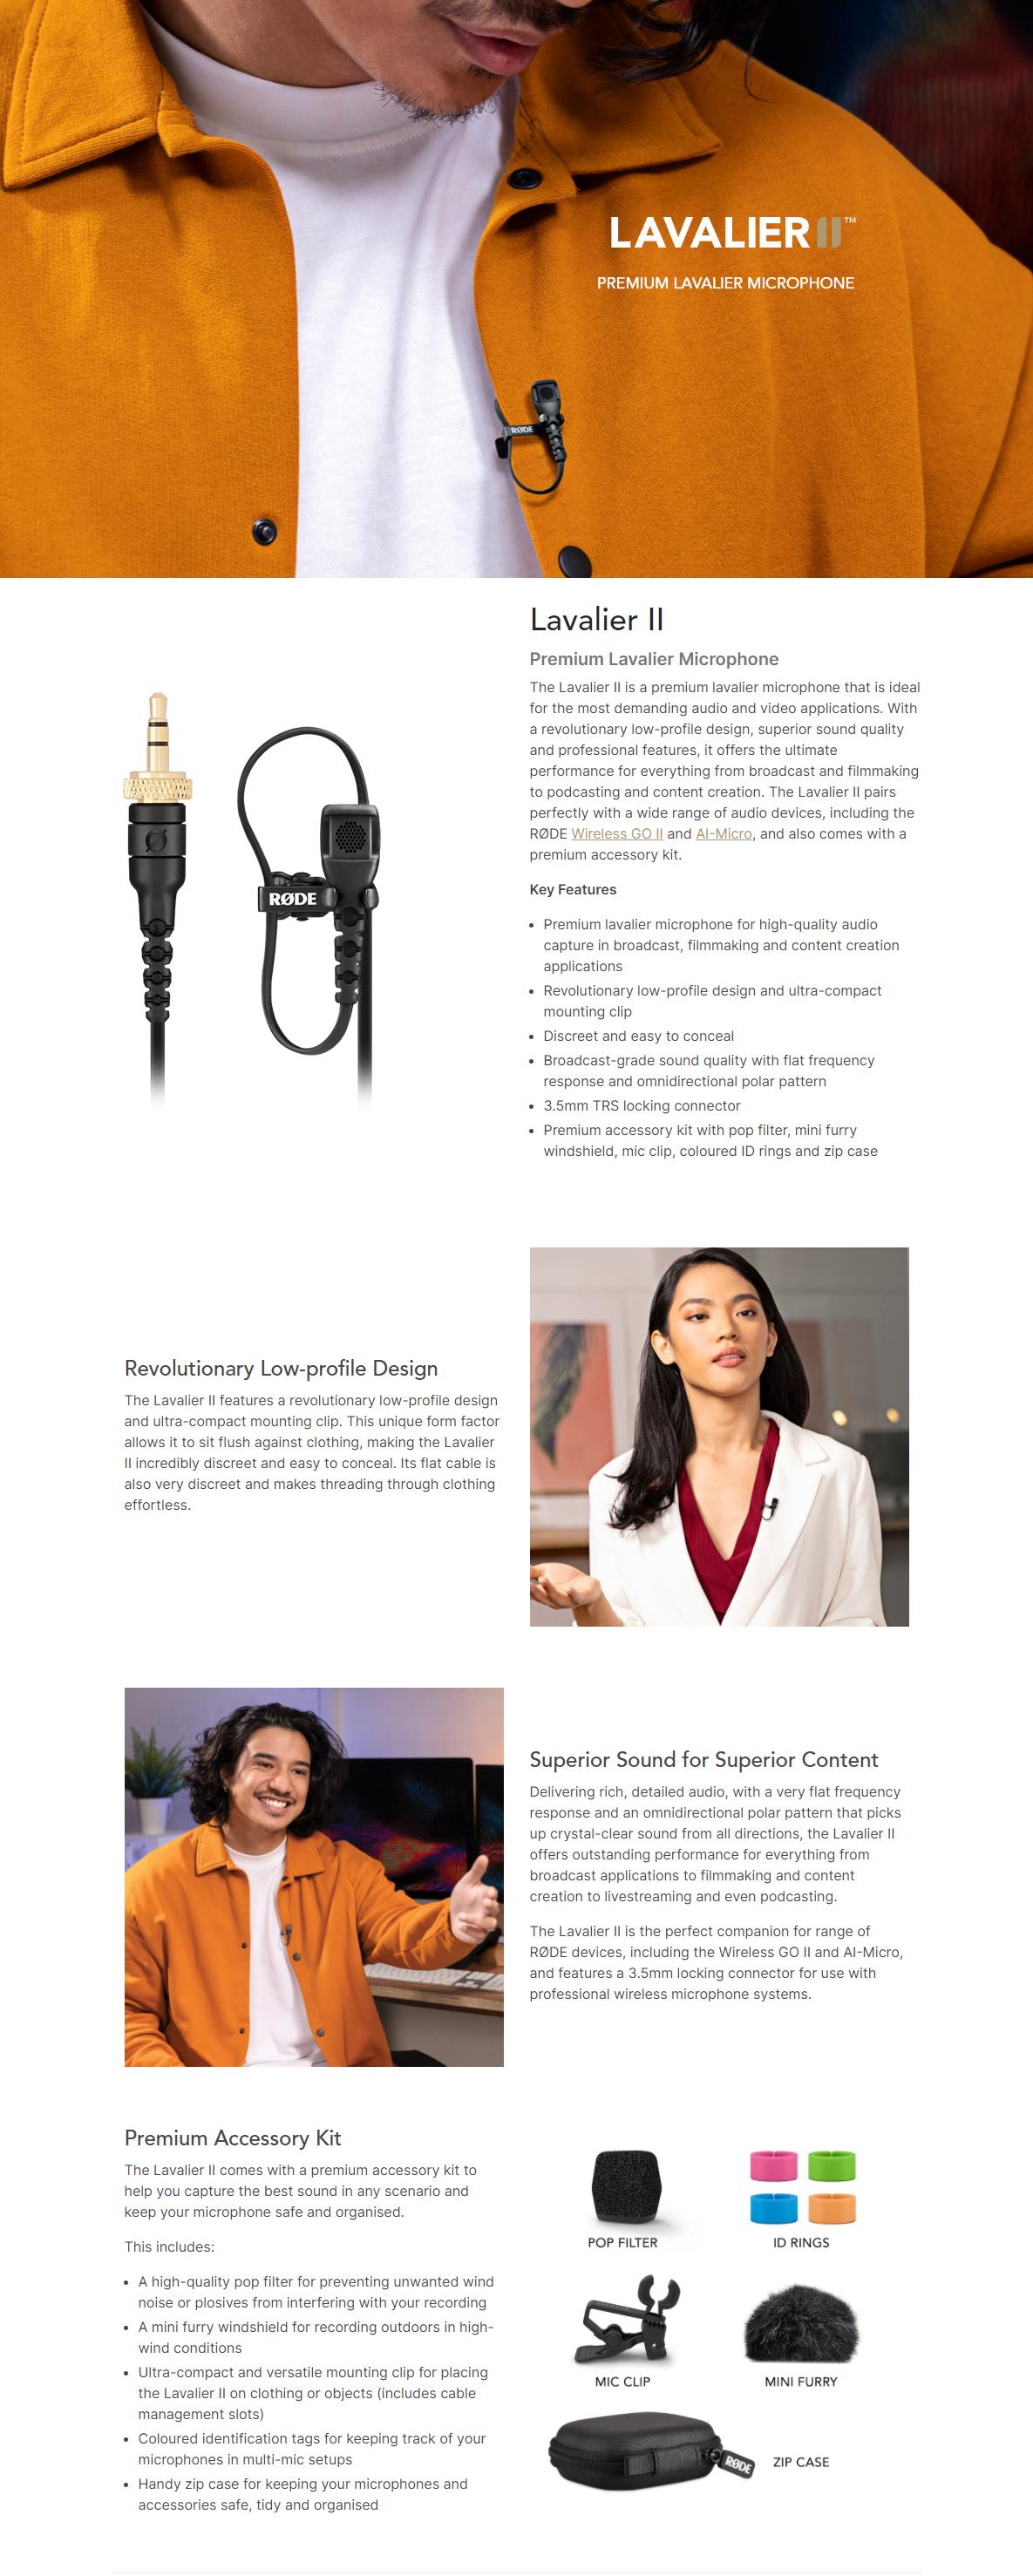 A large marketing image providing additional information about the product RODE Lavalier II Premium Lavalier Microphone - Additional alt info not provided